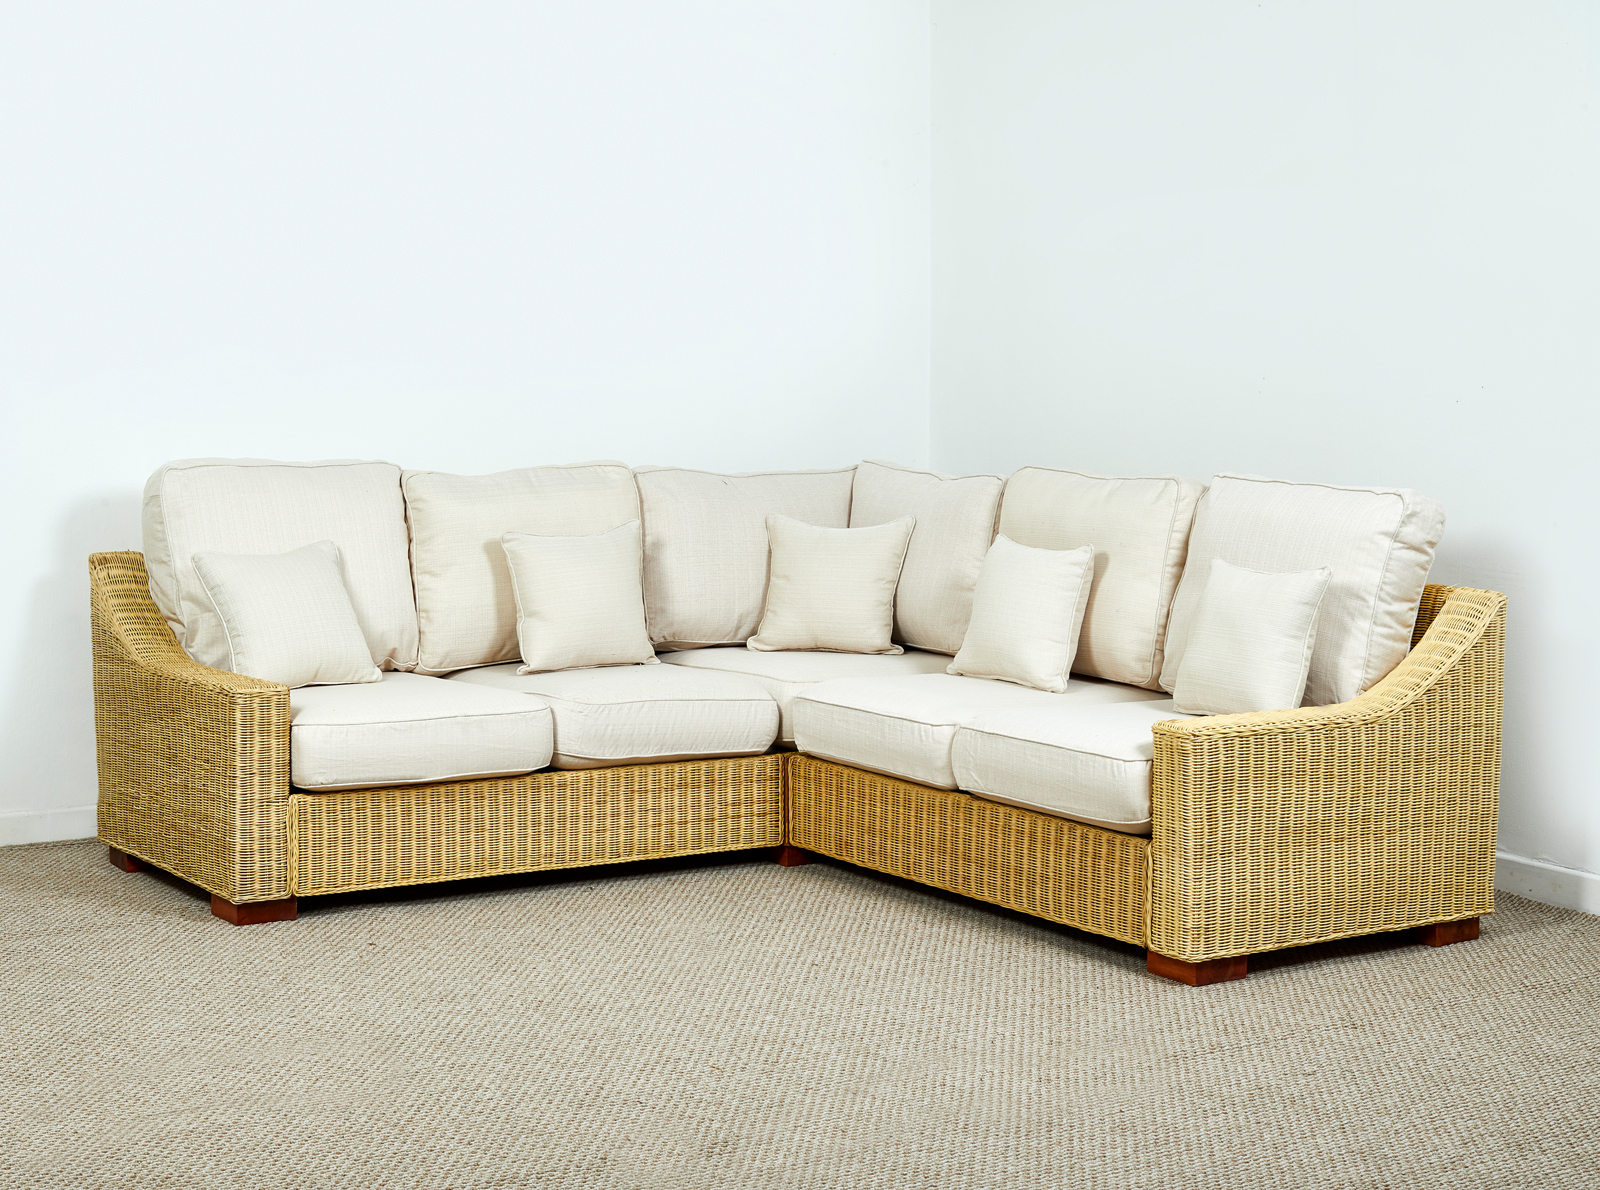 wicker sofa bed for sale